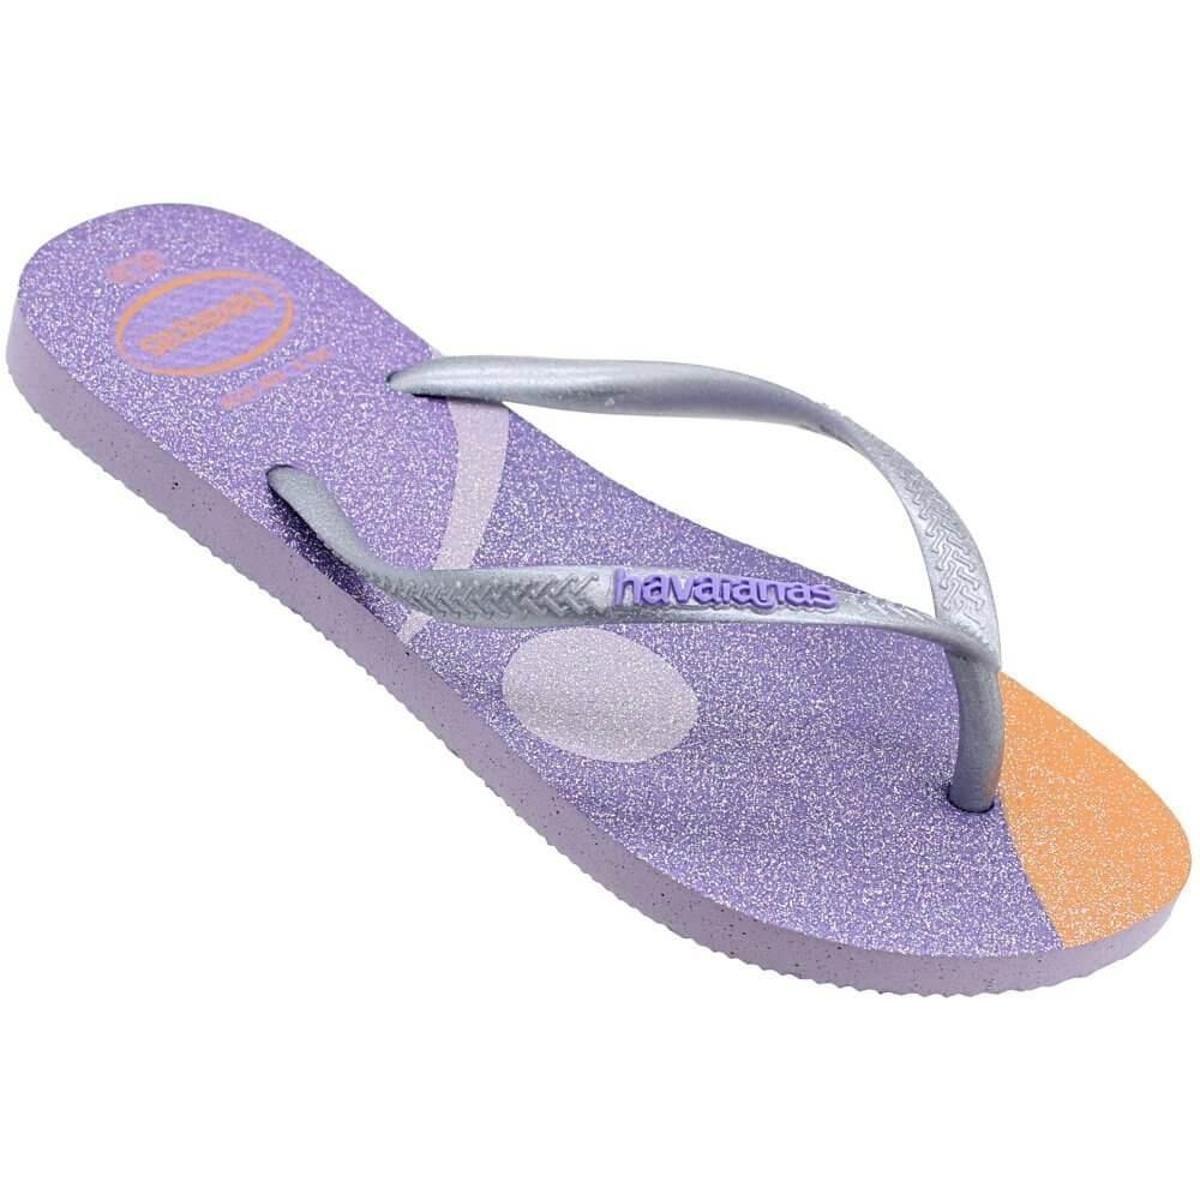 Load image into Gallery viewer, Havaianas Chinelo Slim Palette Glow Lilac
